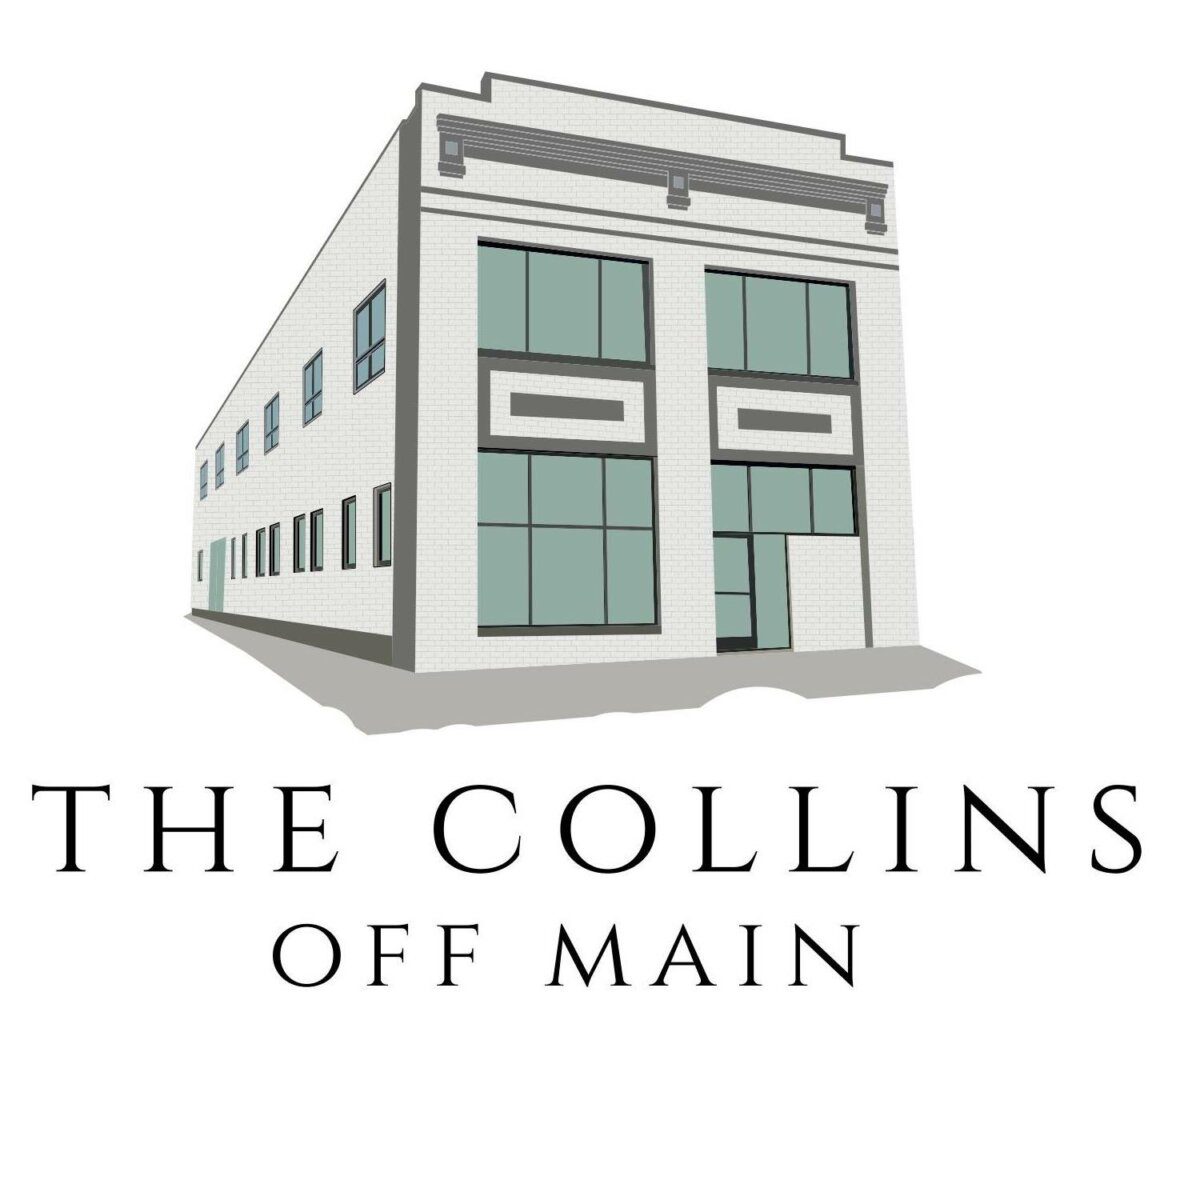 The Collins Off Main